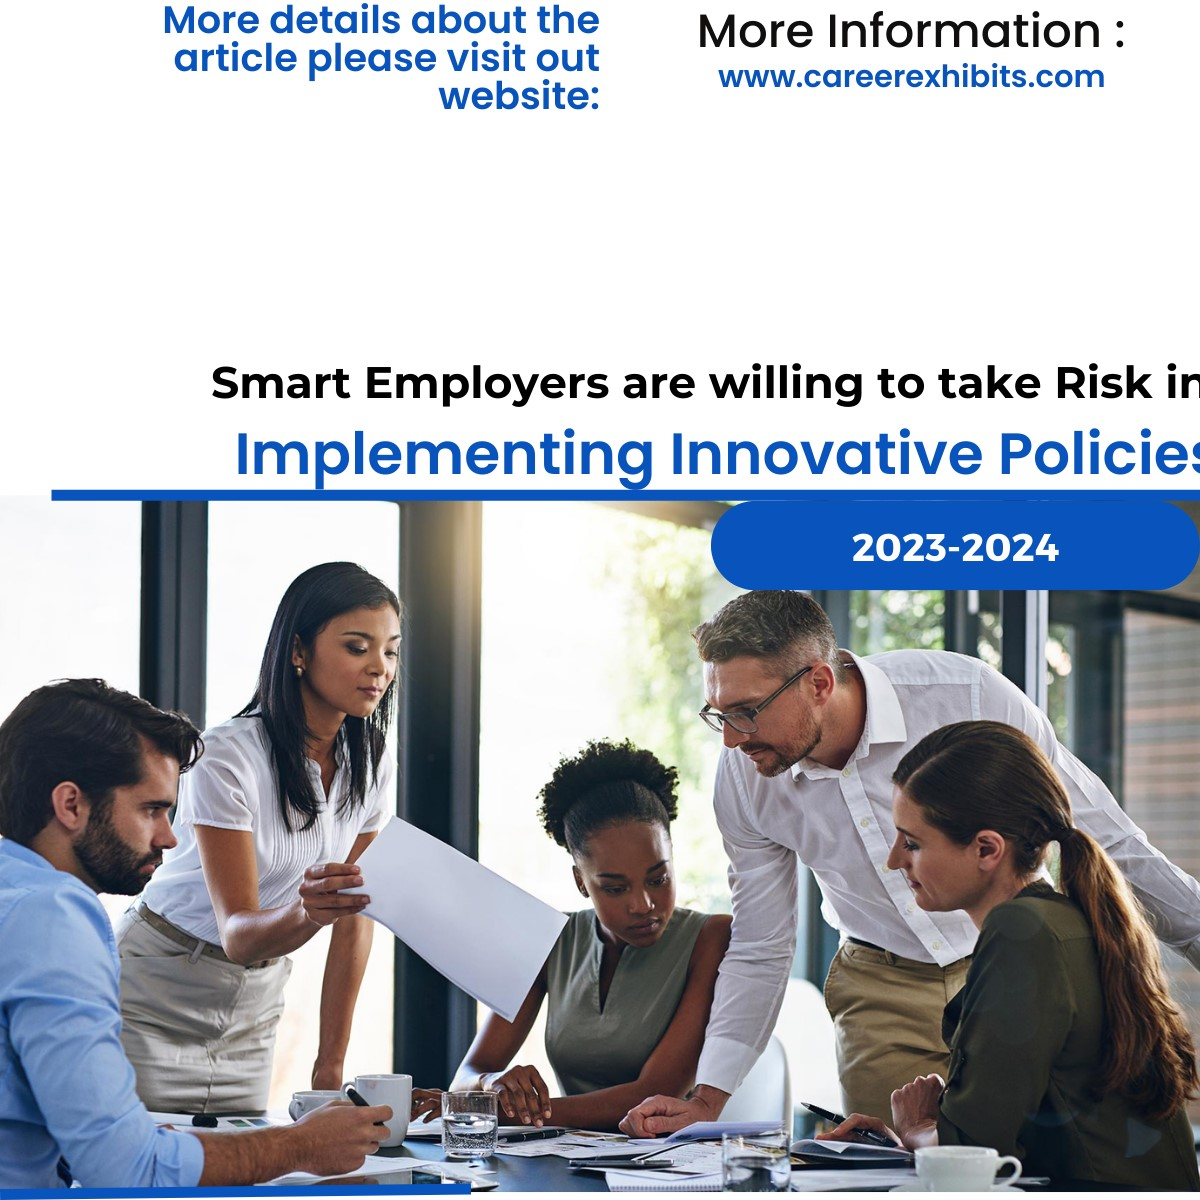 Smart Employers are Willing to Take Risks in Implementing Innovative Policies